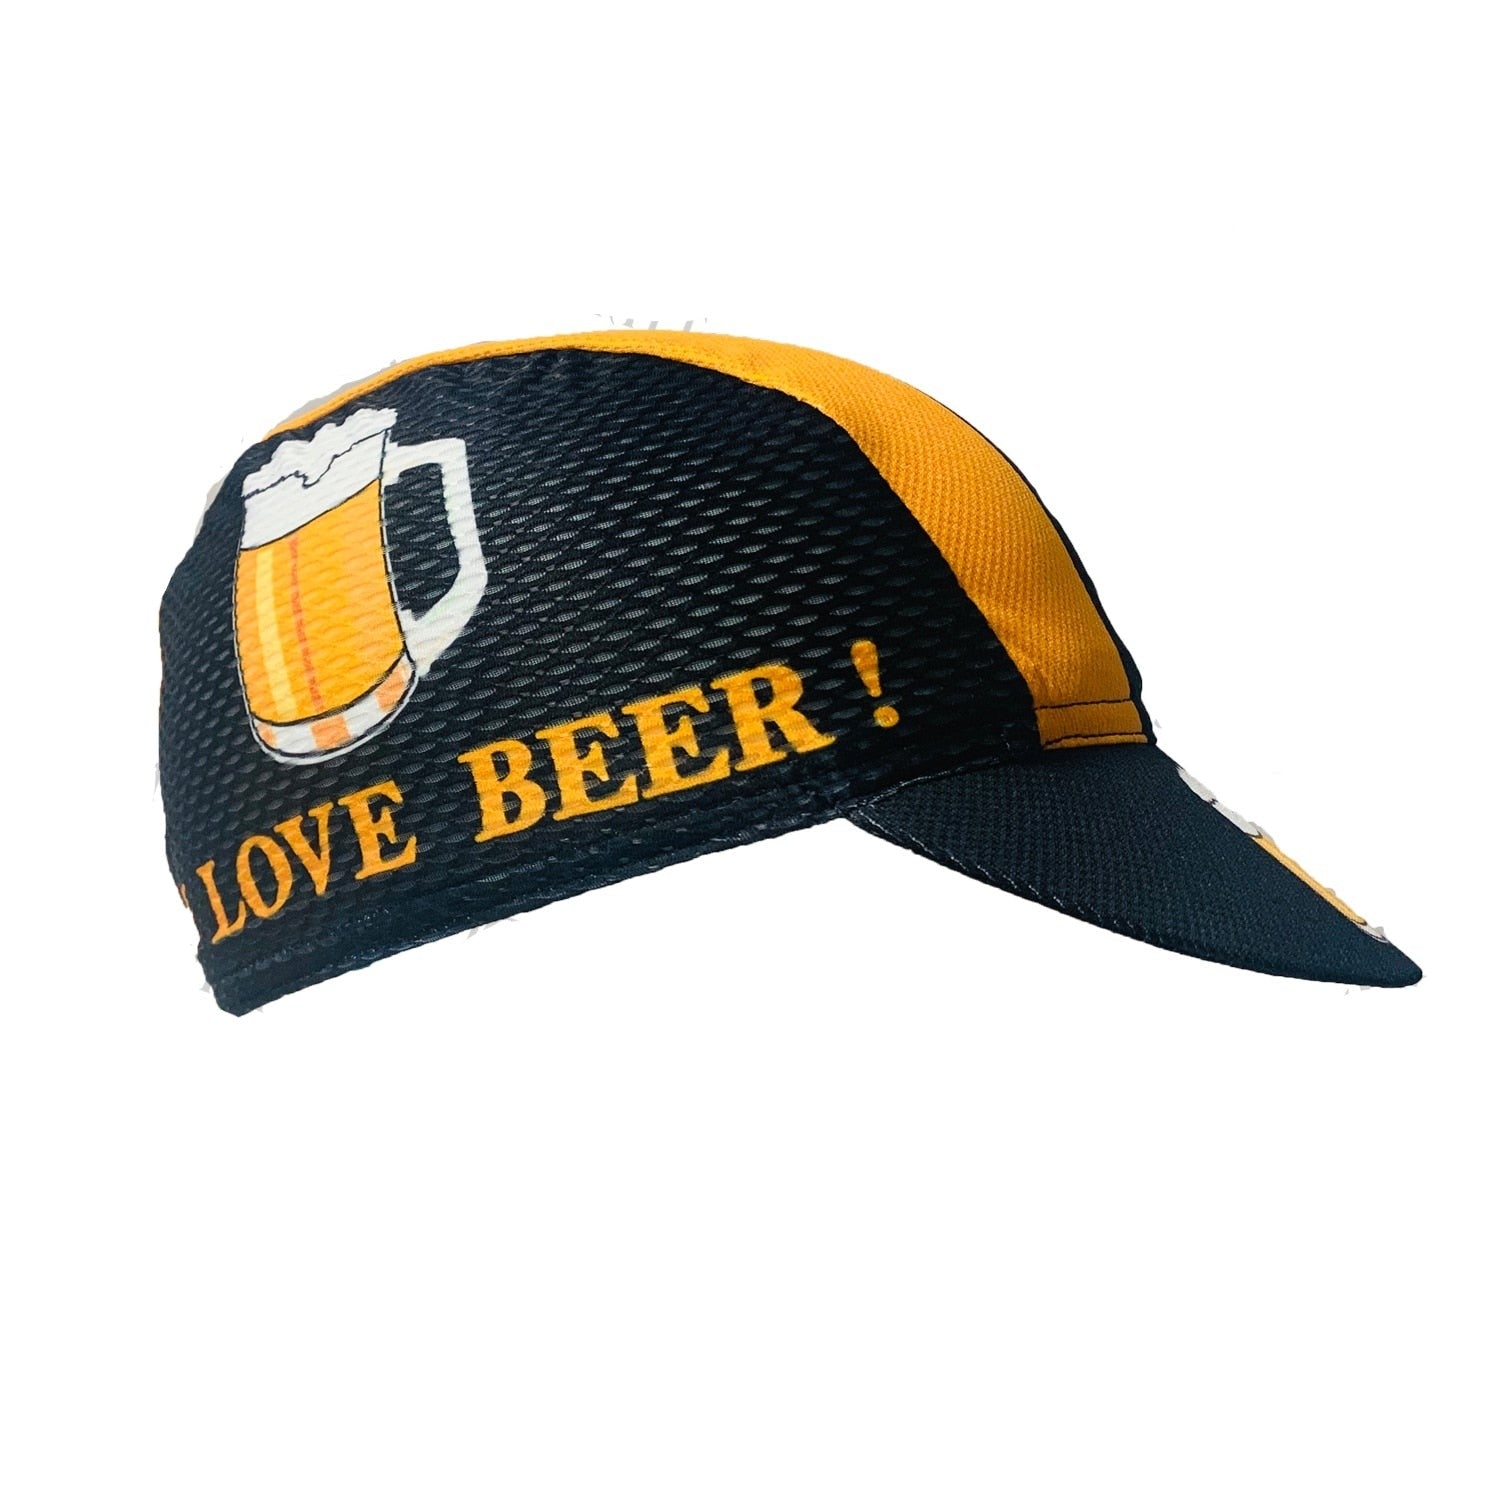 Classic I Iove Beer Polyester Cycling Caps Spring Summer Yellow Black Breathable For Bicycle Men  Women Wear Bandana